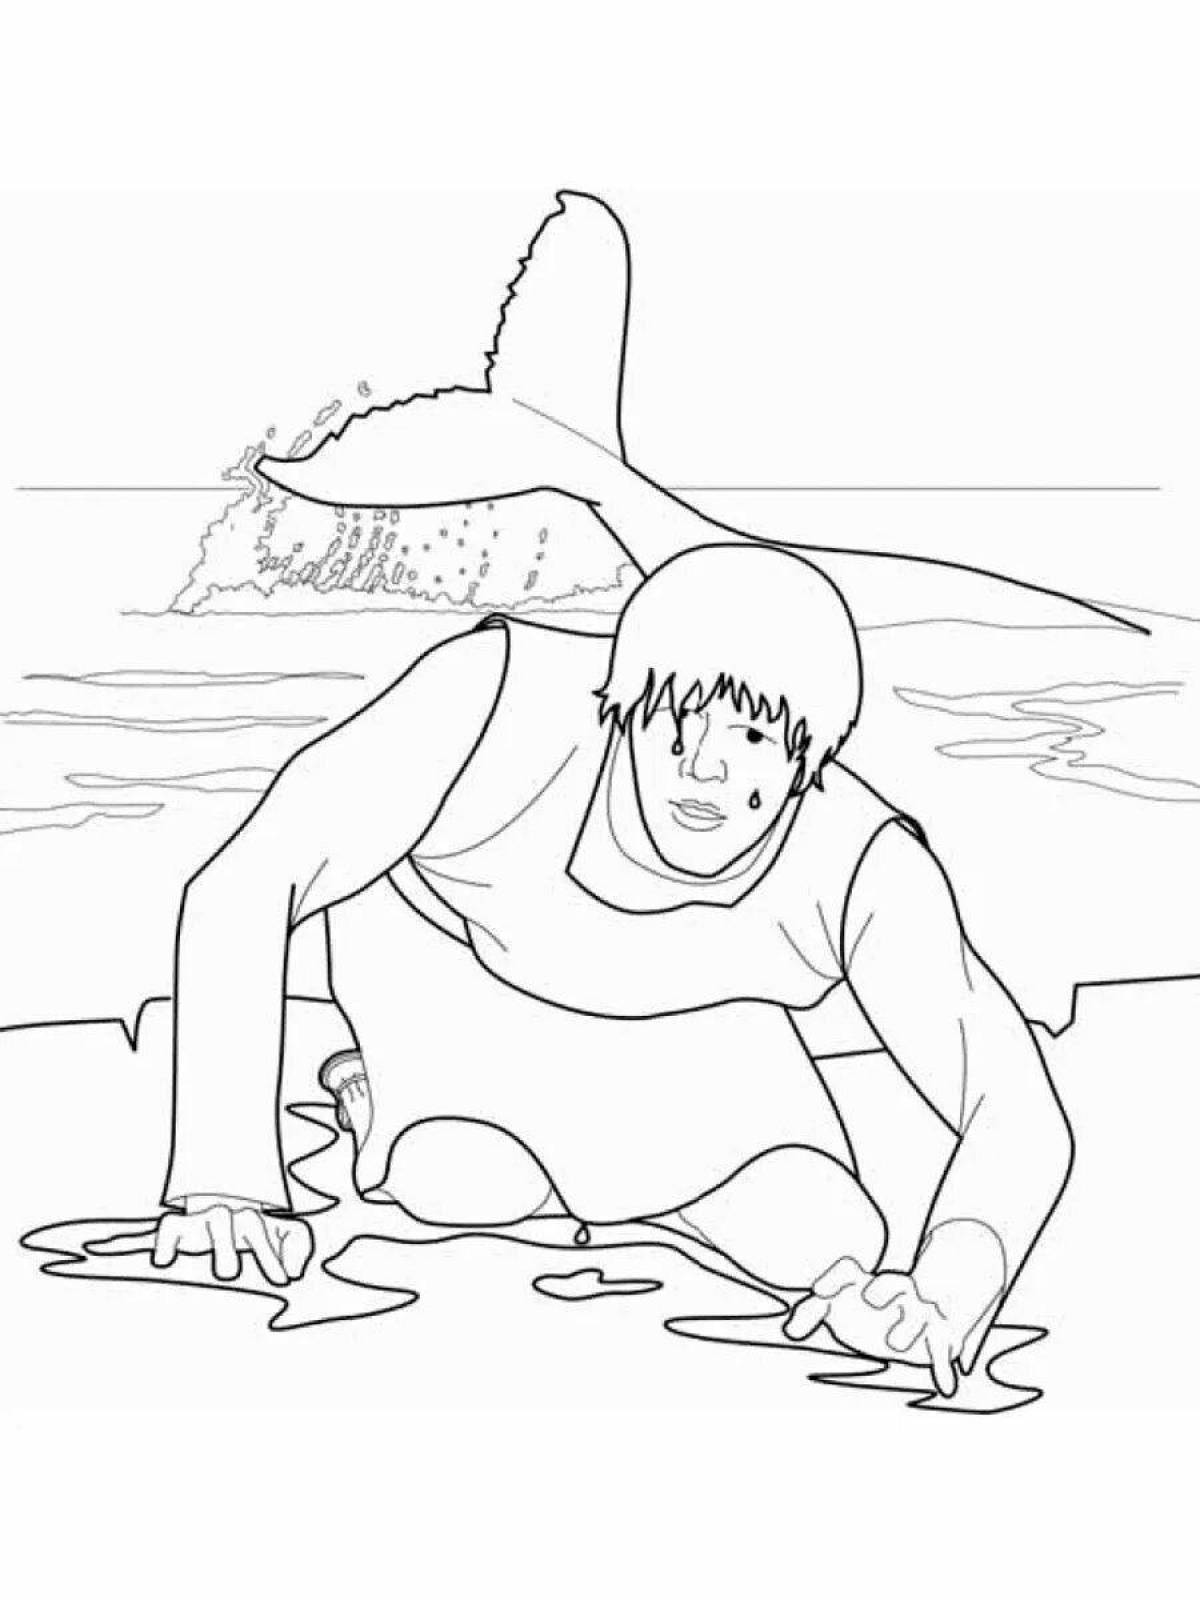 Elegant whale and iona coloring book